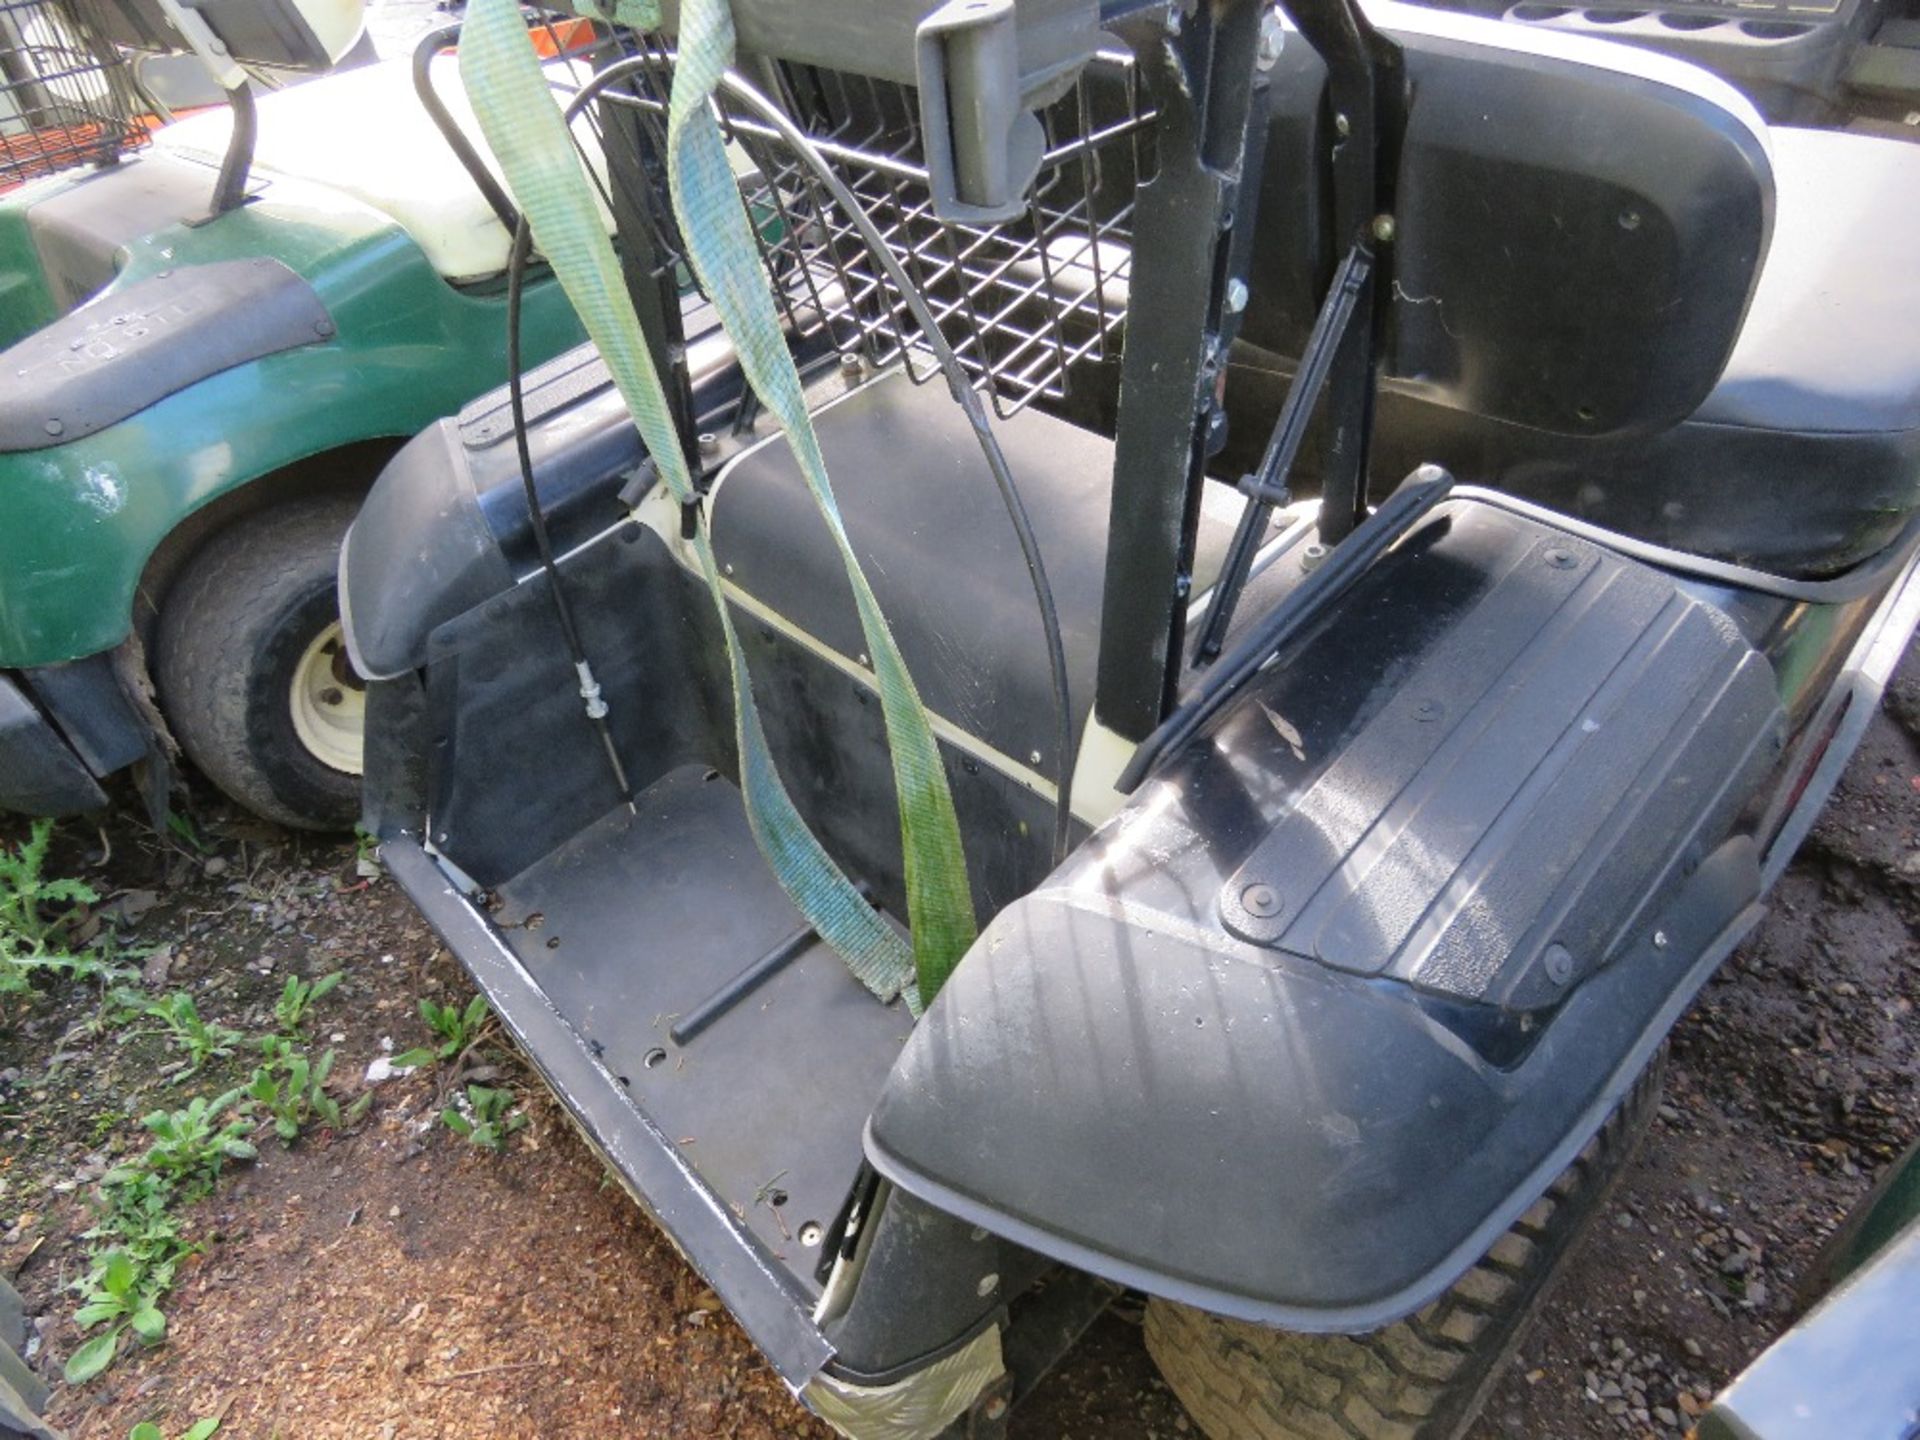 EZGO PETROL ENGINED GOLF BUGGY. BLACK COLOURED. WHEN TESTED WAS SEEN TO RUN, DRIVE, STEER AND BRAKE. - Image 4 of 7